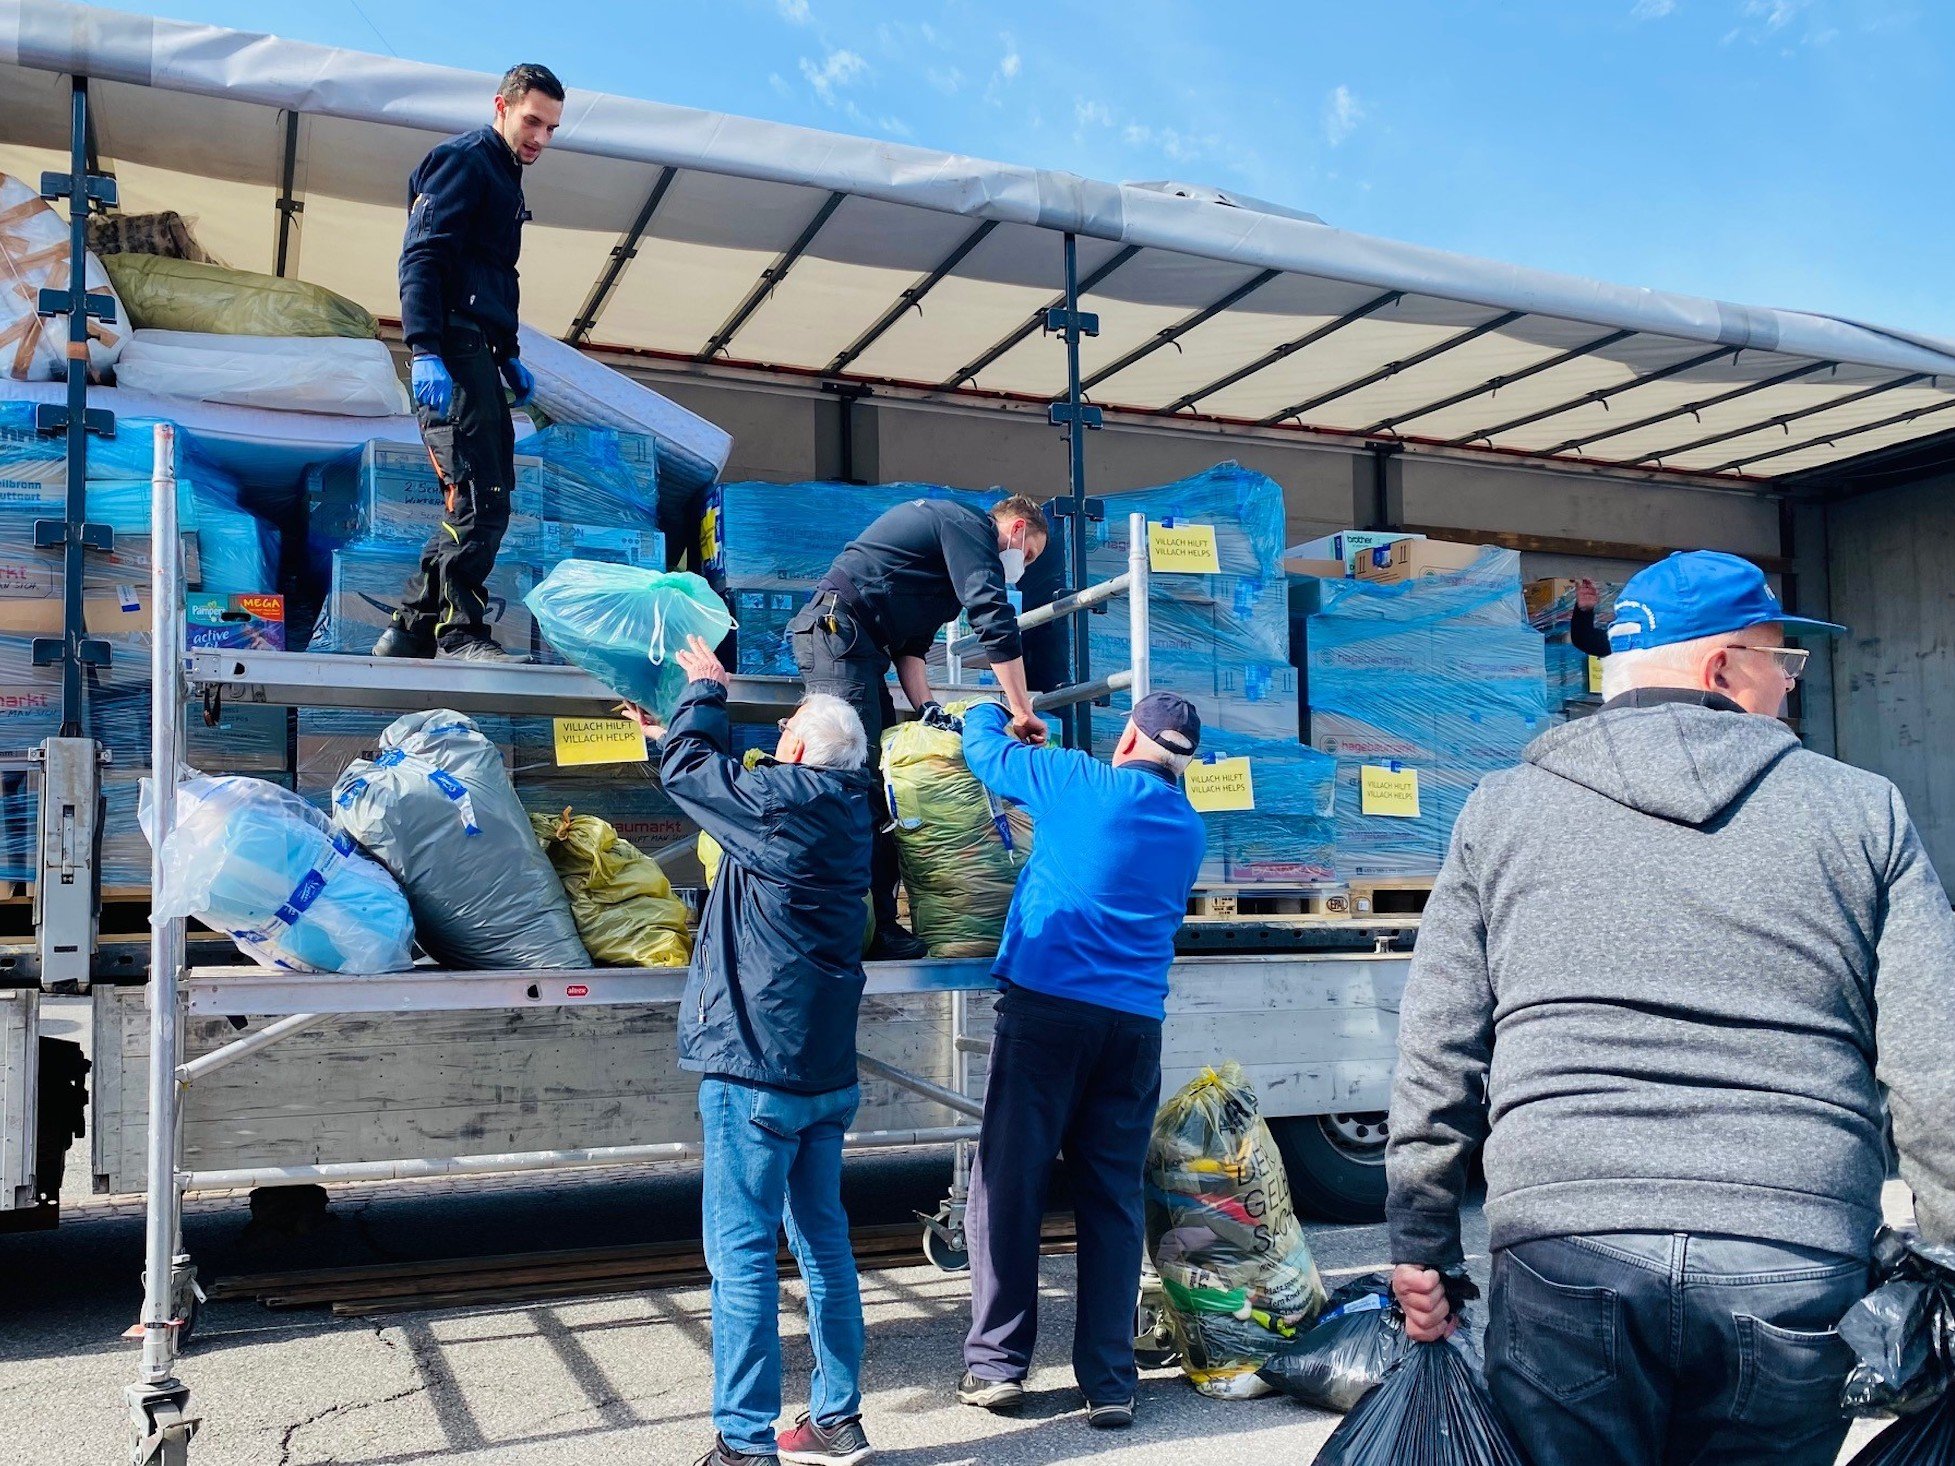 Truck being loaded with food and clothing boxes for Ukraine